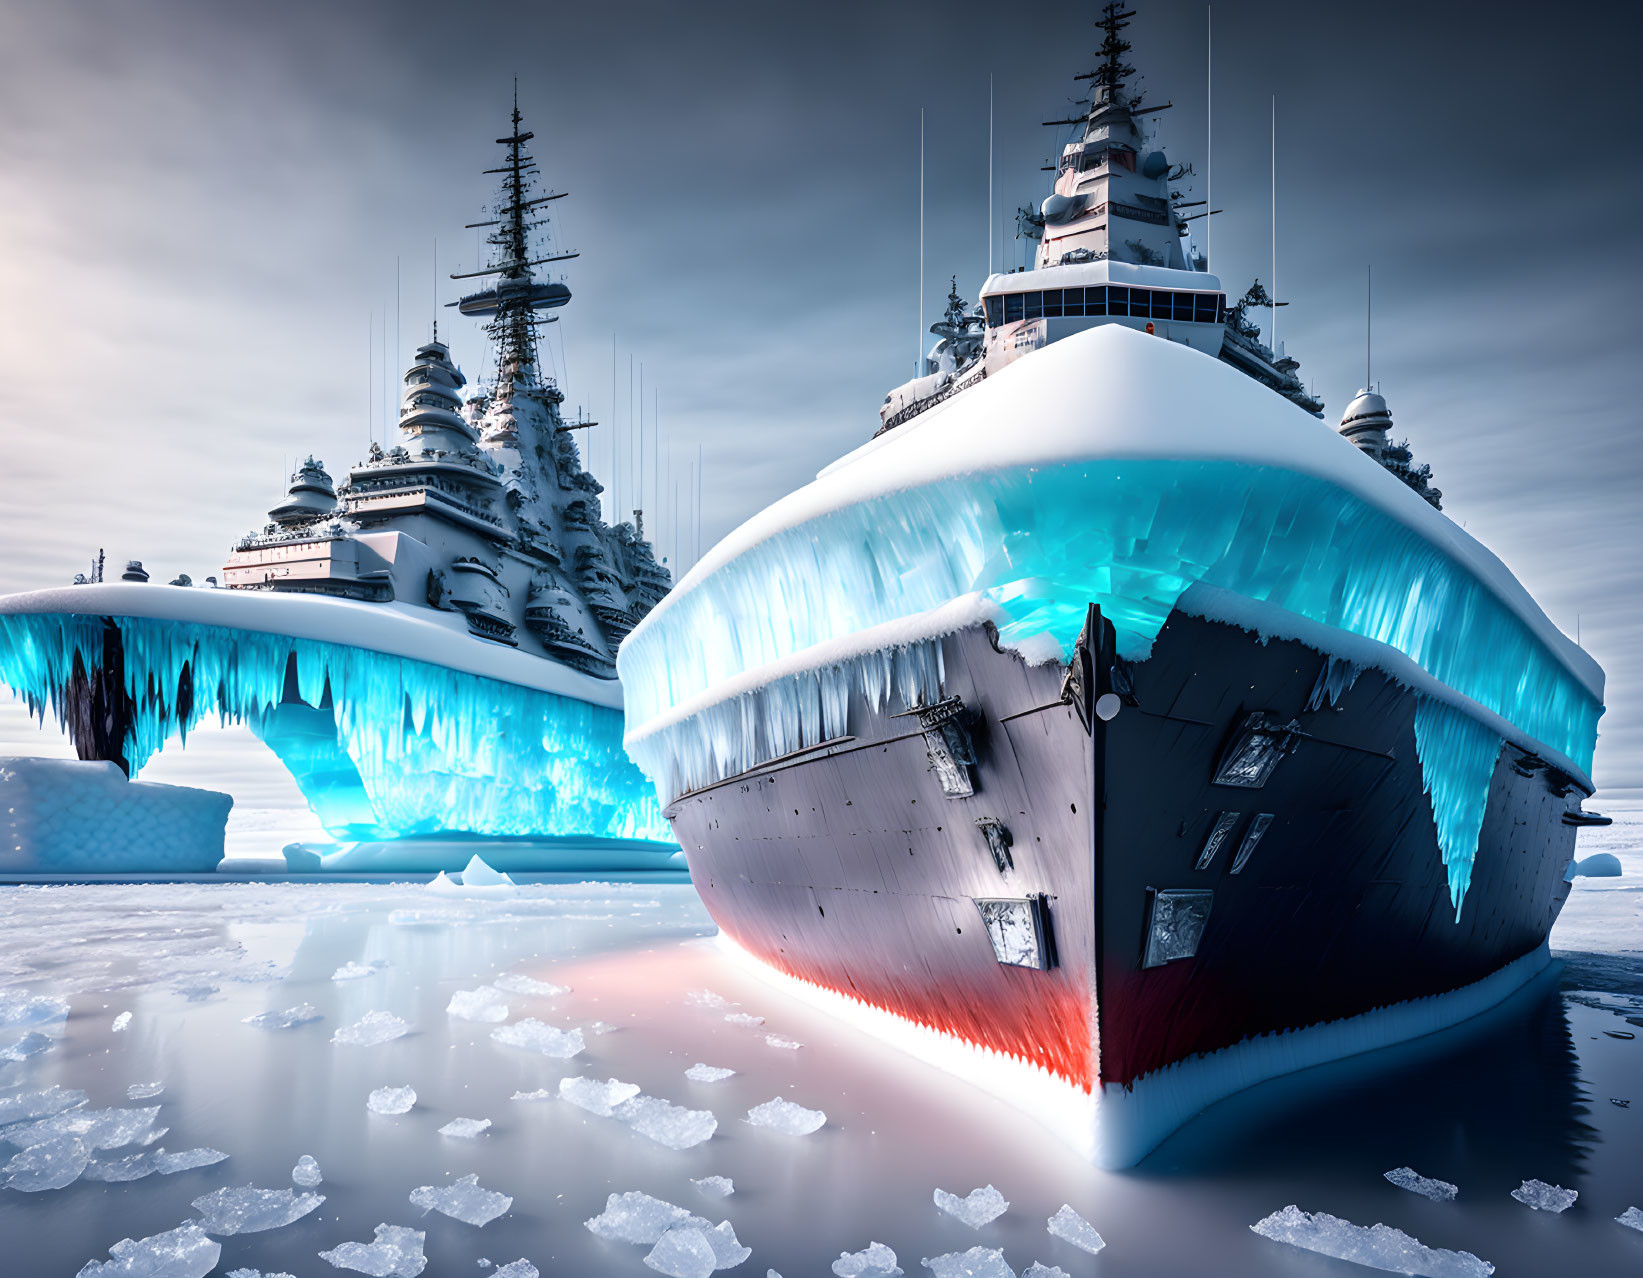 When the ships arrived at ice land